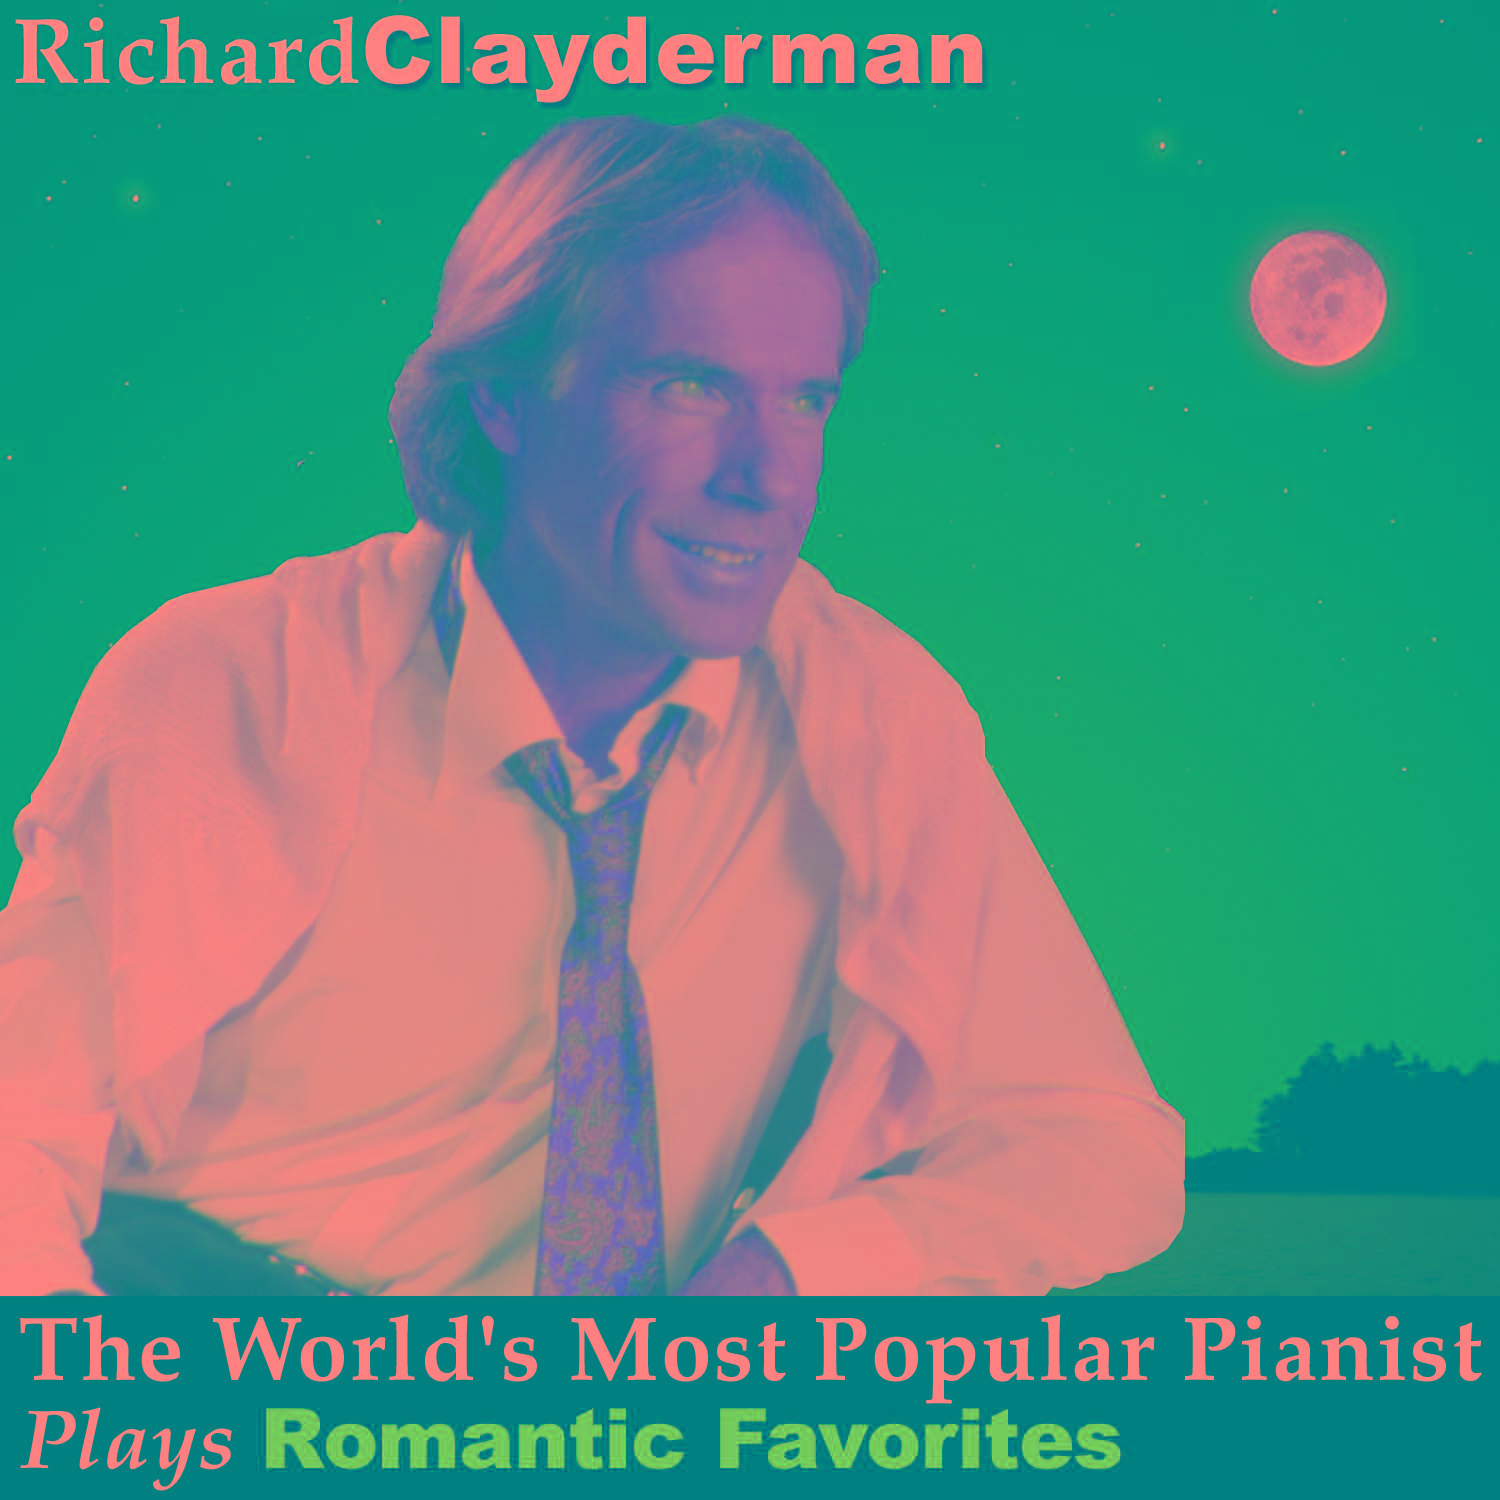 The World's Most Popular Pianist Plays Romantic Favorites